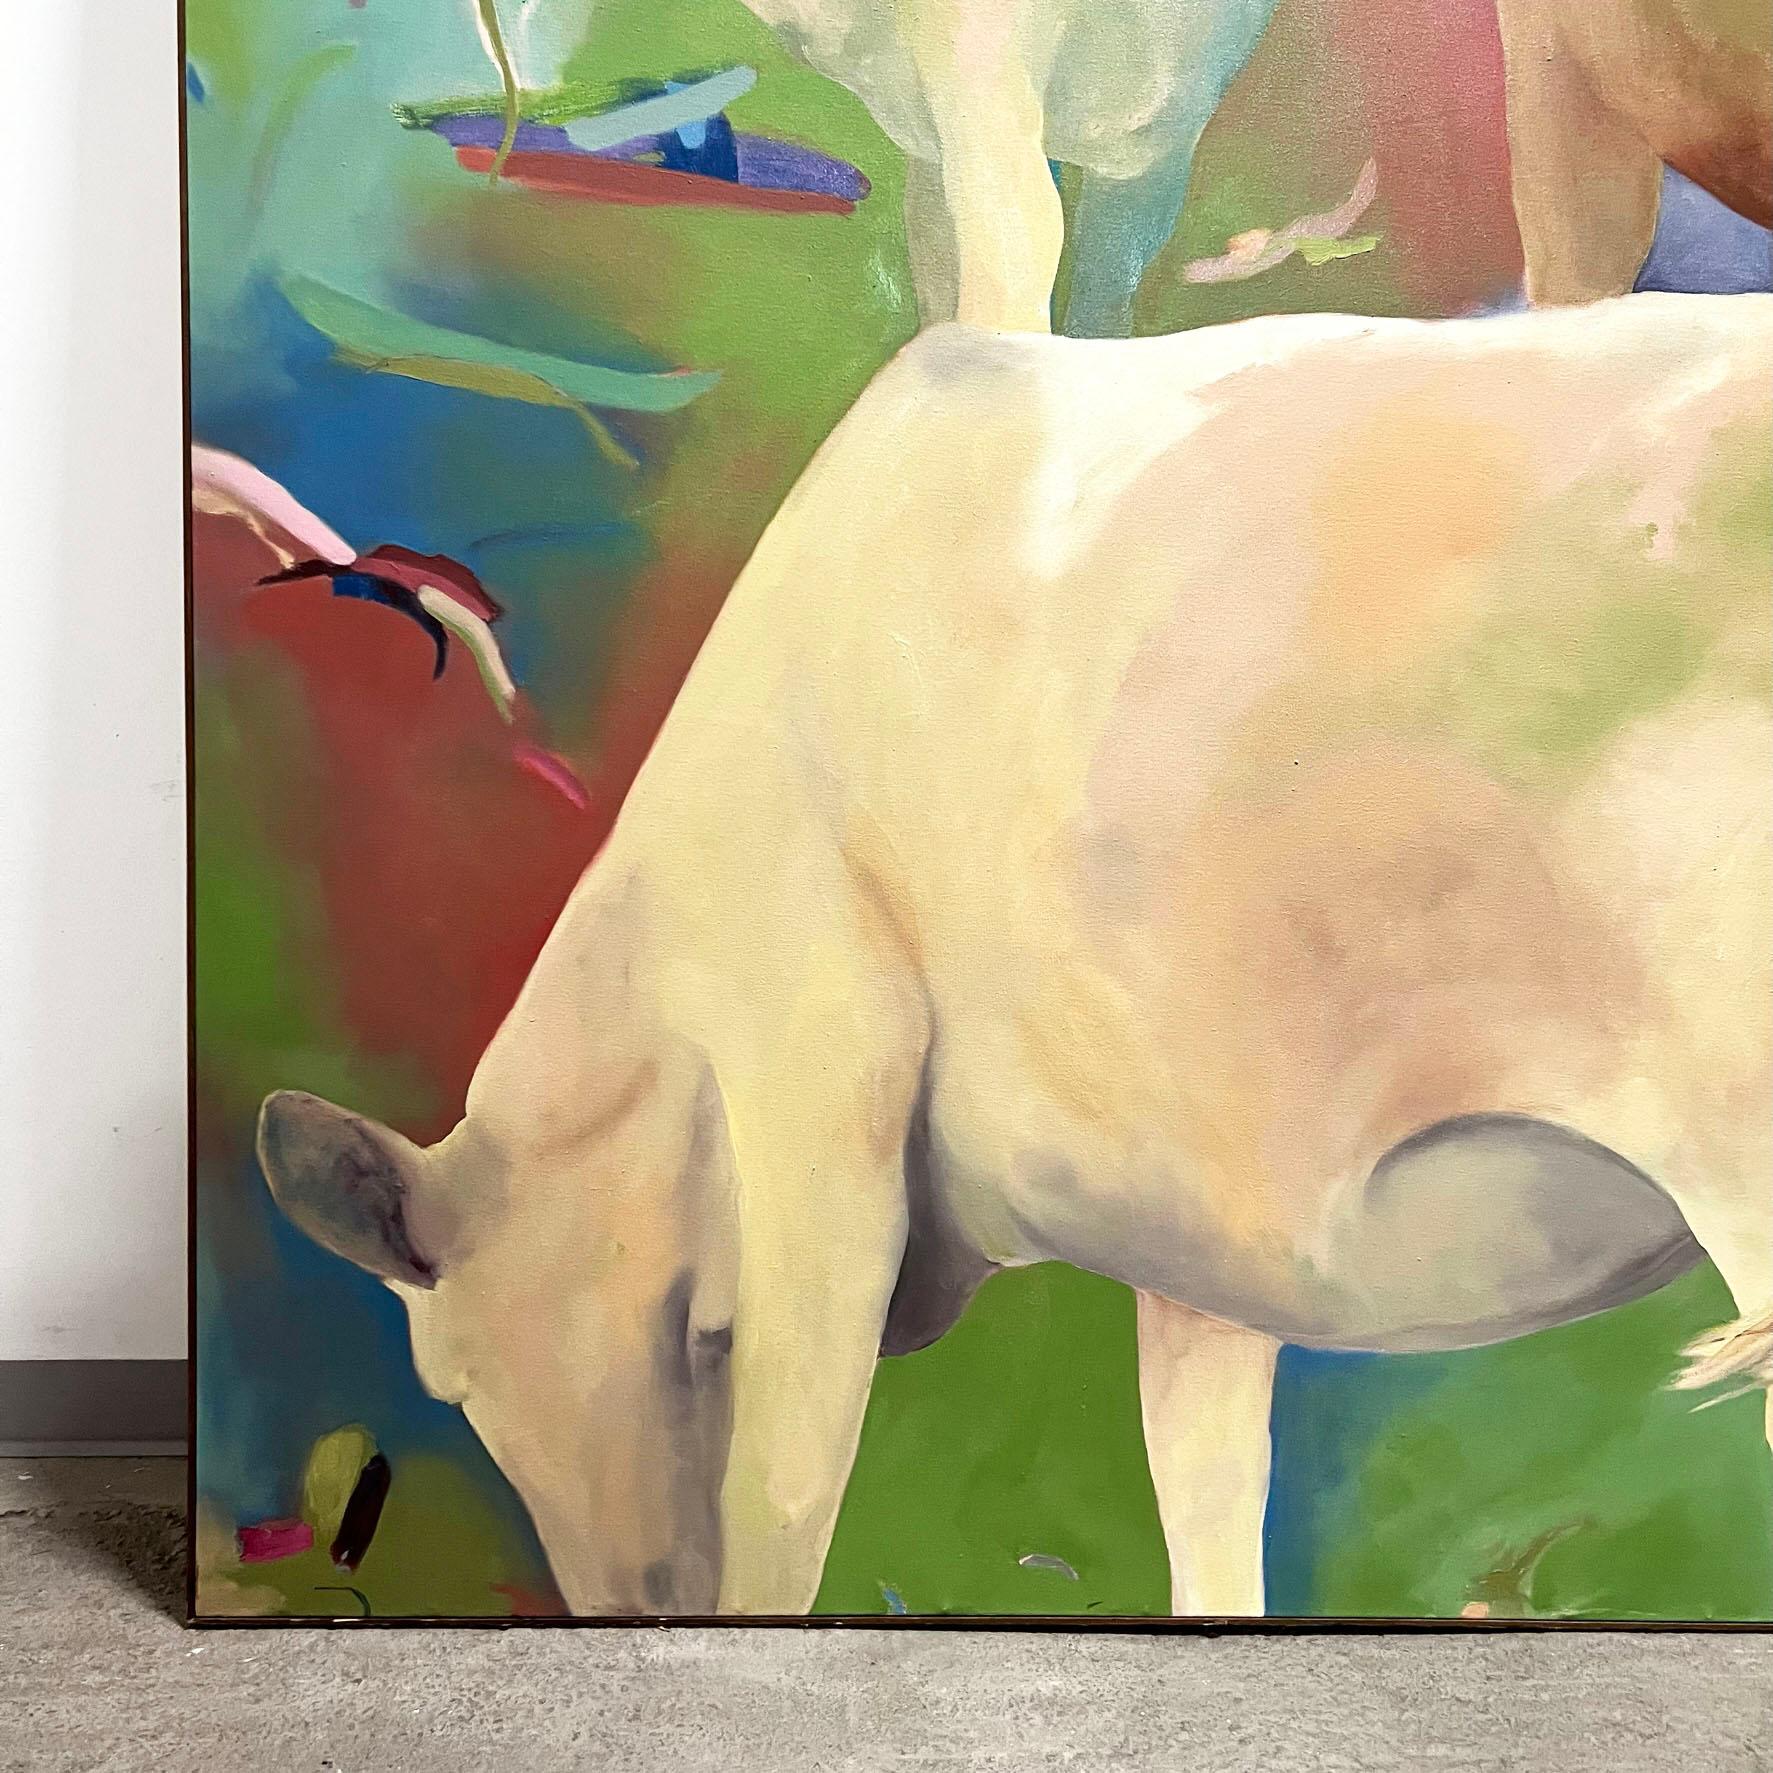 A life-sized canvas entitled “Buttermilk Fantasy” d. 1981, by the gifted Boston artist Pat Monson (1941-2019) Measures 104.25